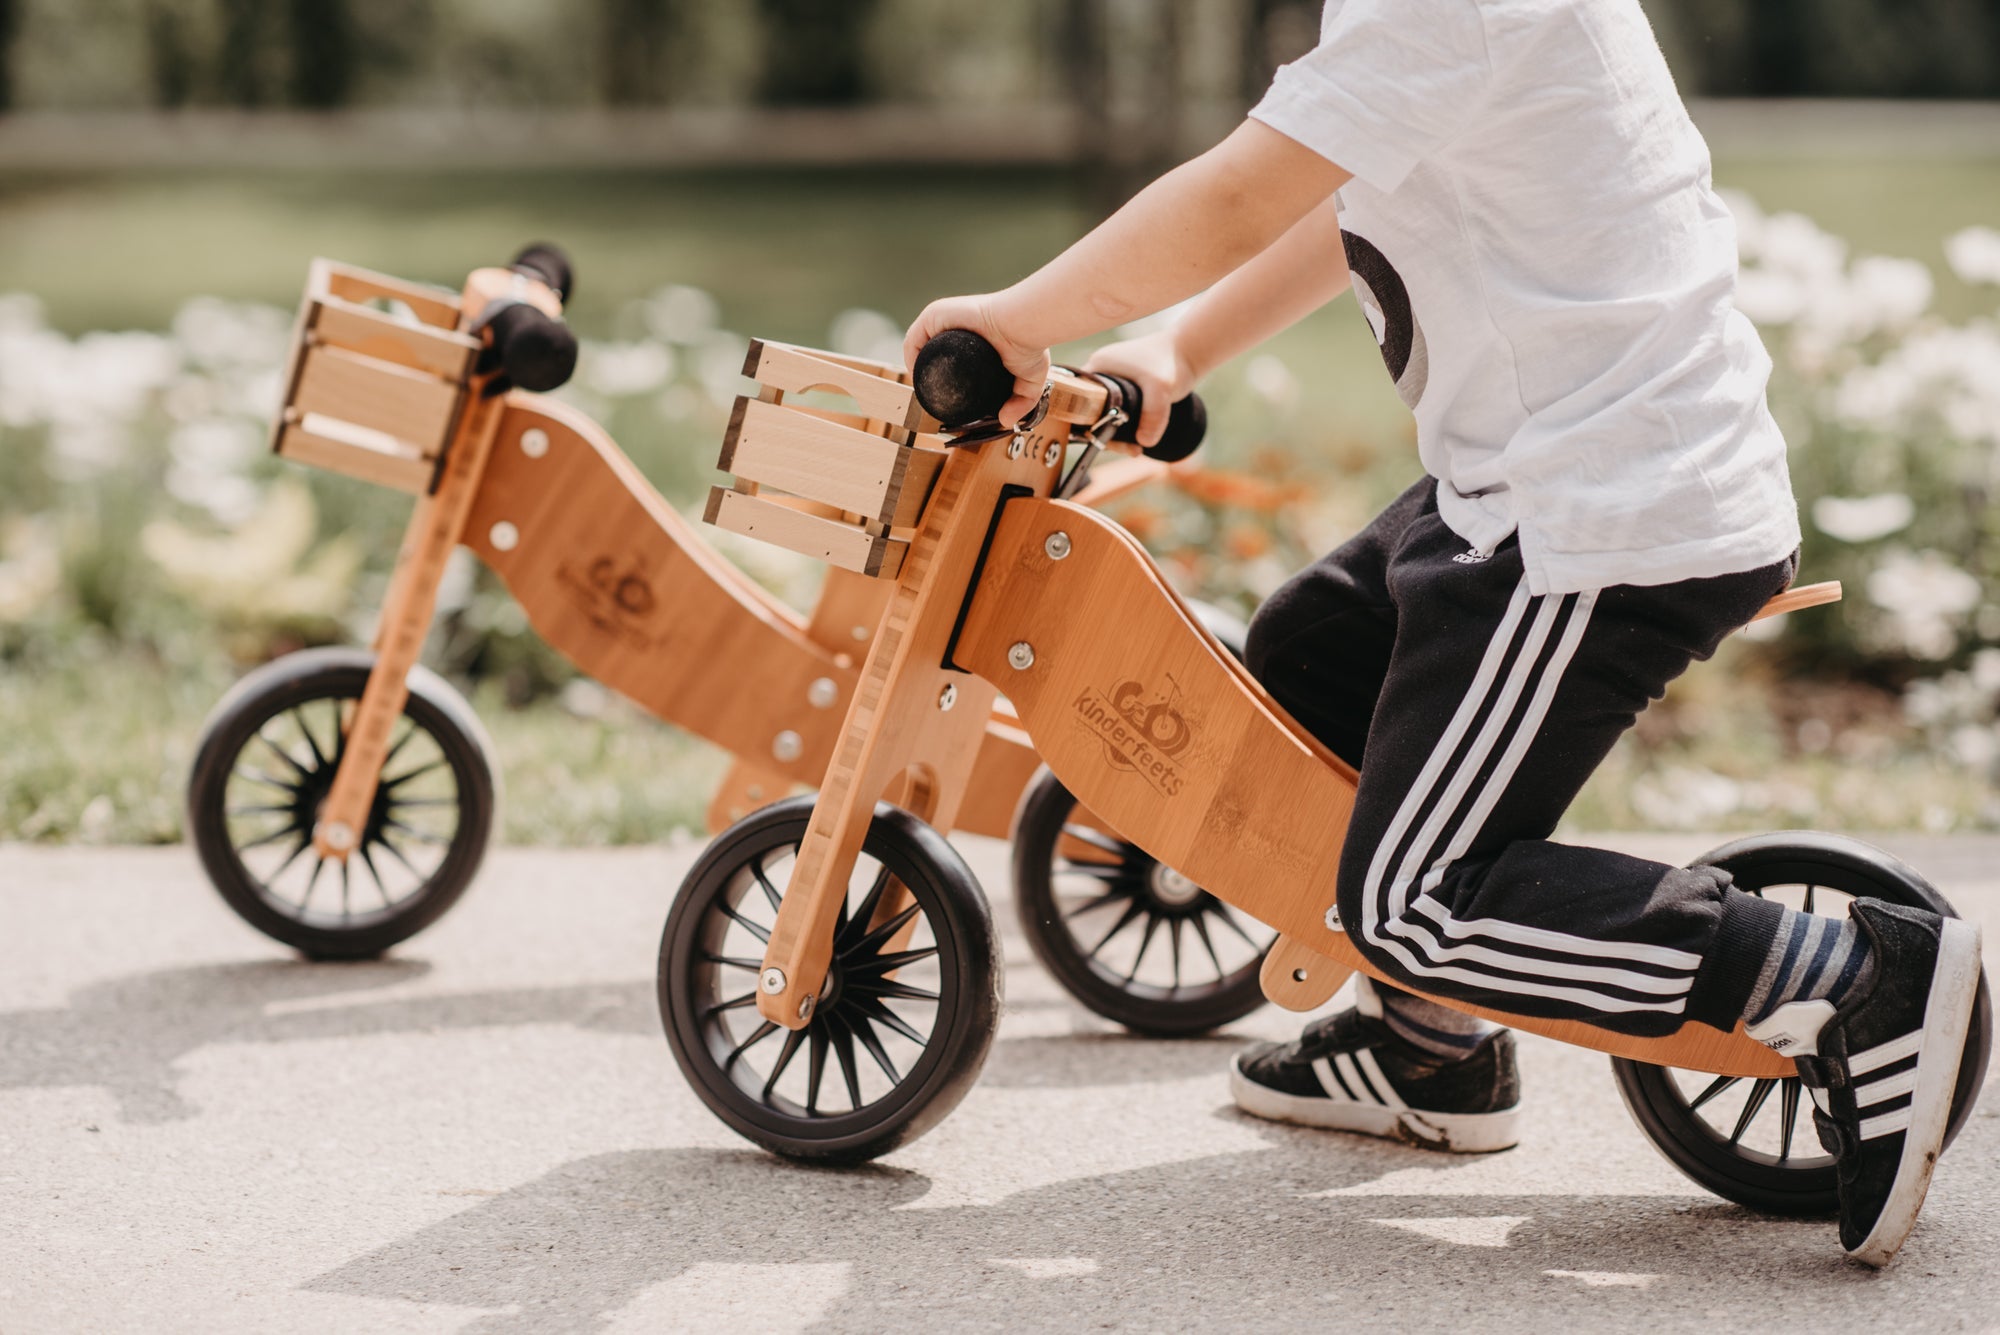 Kinderfeets Tiny Tot Plus tricycle balance bike wooden training bike running bike no pedals toddler children kids birch wood white and wooden crate basket